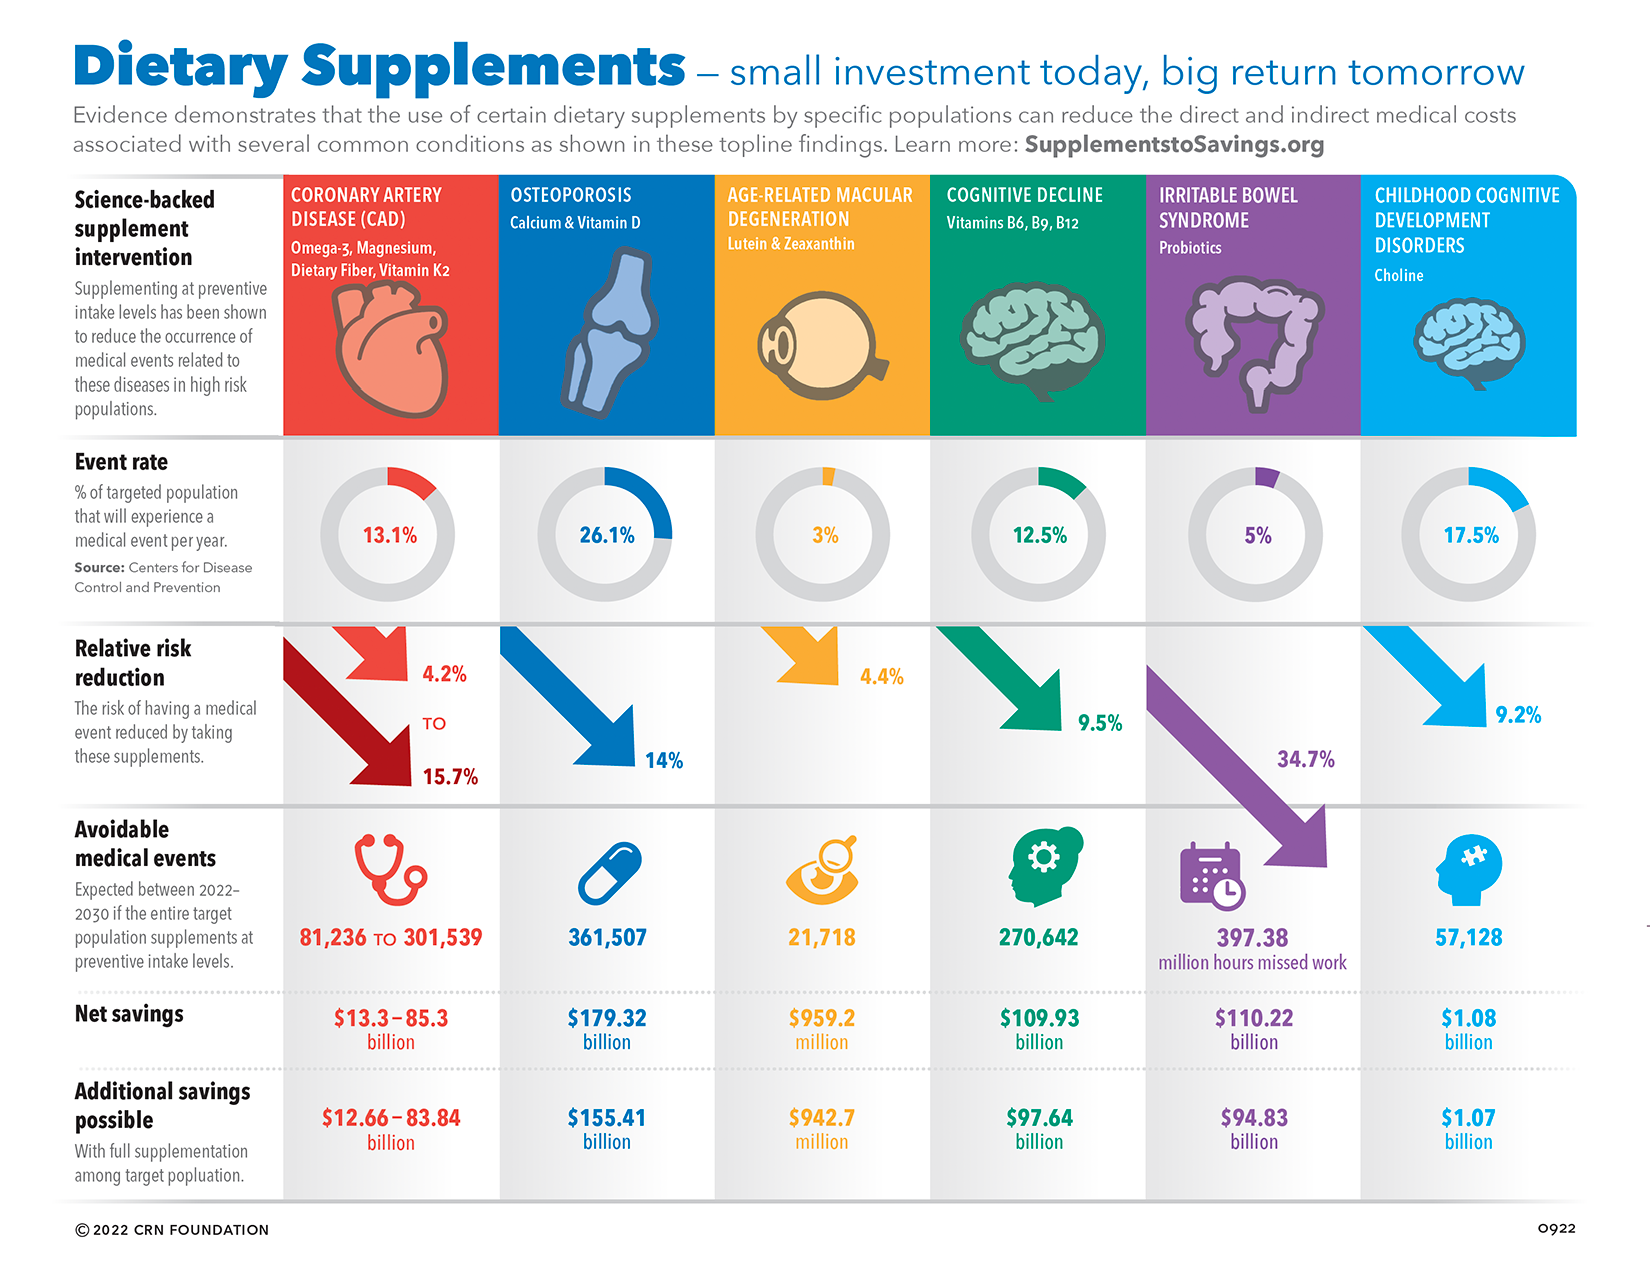 Supplements-to-Savings-Overall-09-22